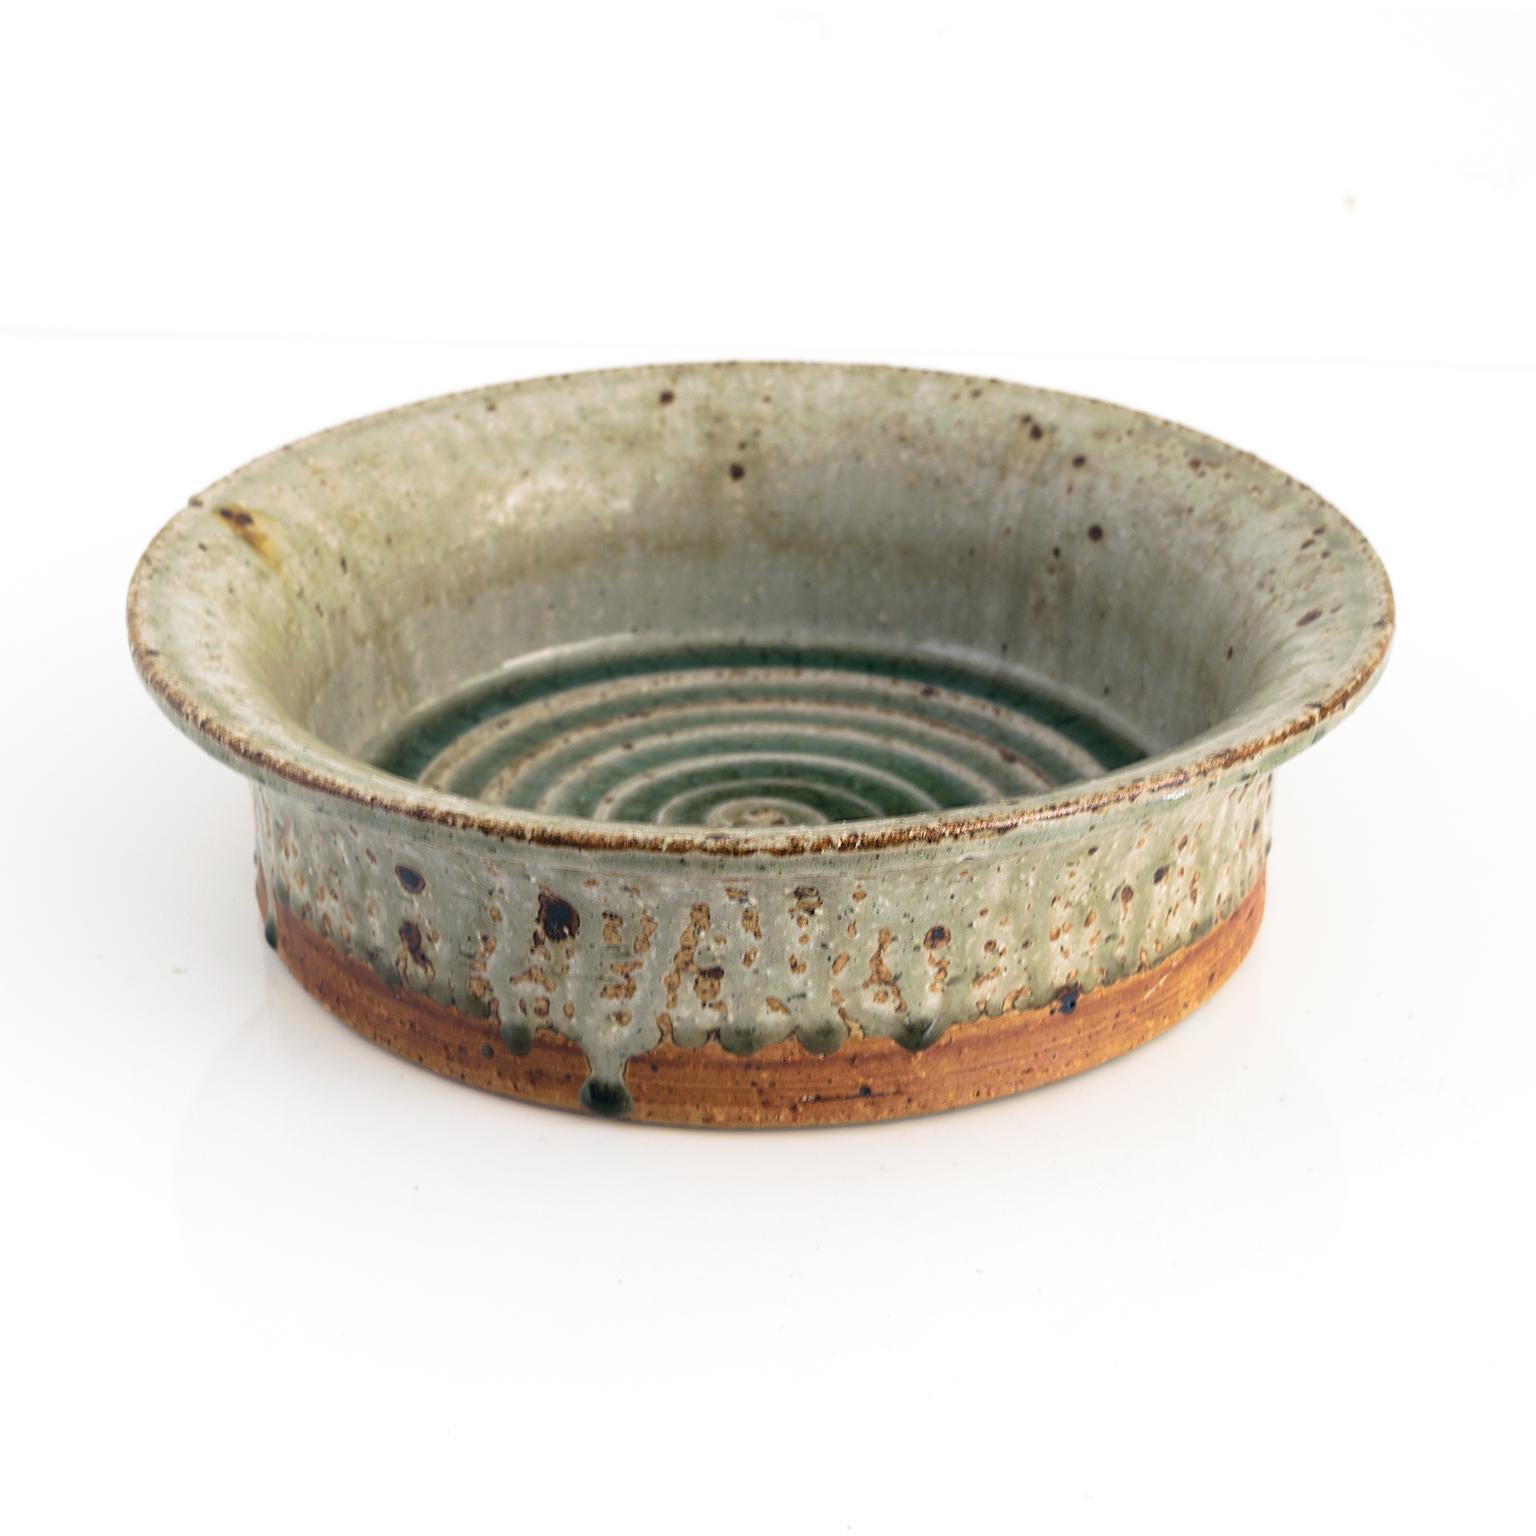 MARIANNE WESTMAN hand thrown stoneware bowl with flared edge and a spiral with green glaze inside. Exterior is partially glazed and accented with a series of dripping points. Made at Rörstrand Ateljé, Sweden circa 1960, signed.

Diameter: 11.5”